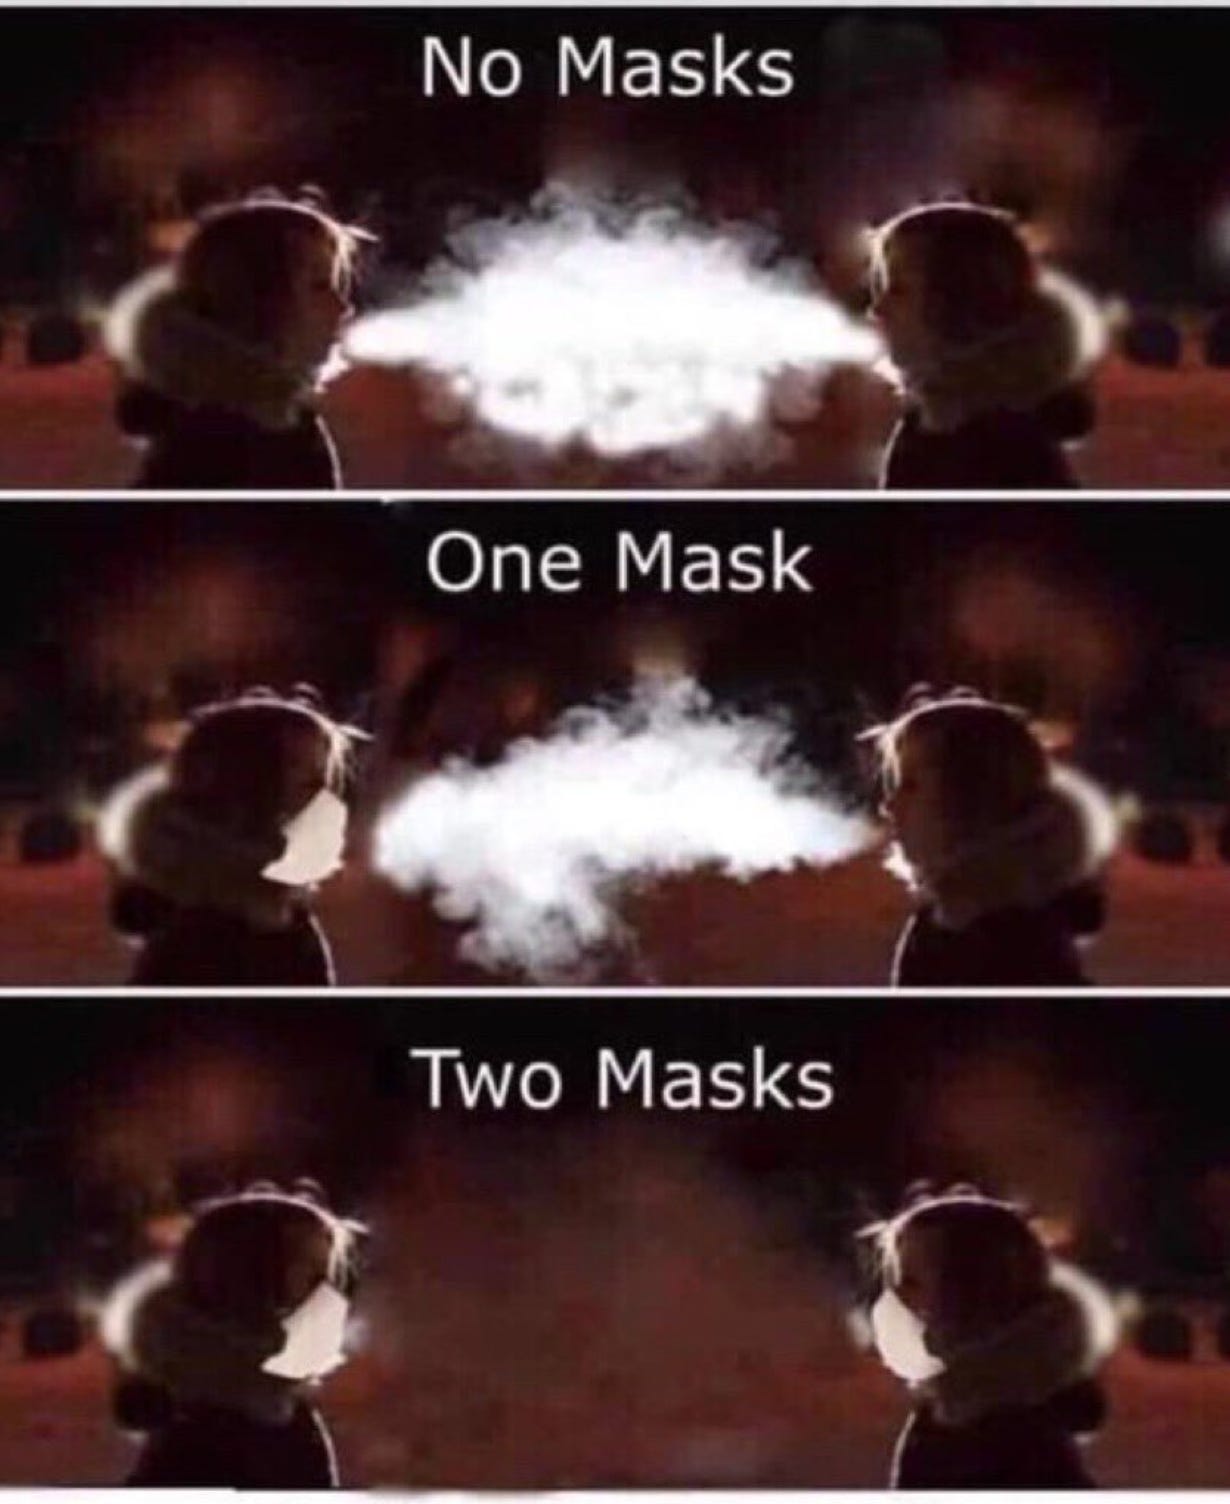 Image depicting aerosol particles generated as we breathe / speak and the impact of two-way masking. Source: Kimberly Prather, Distinguished Professor, Center for Aerosol Impacts and Chemistry of Environment